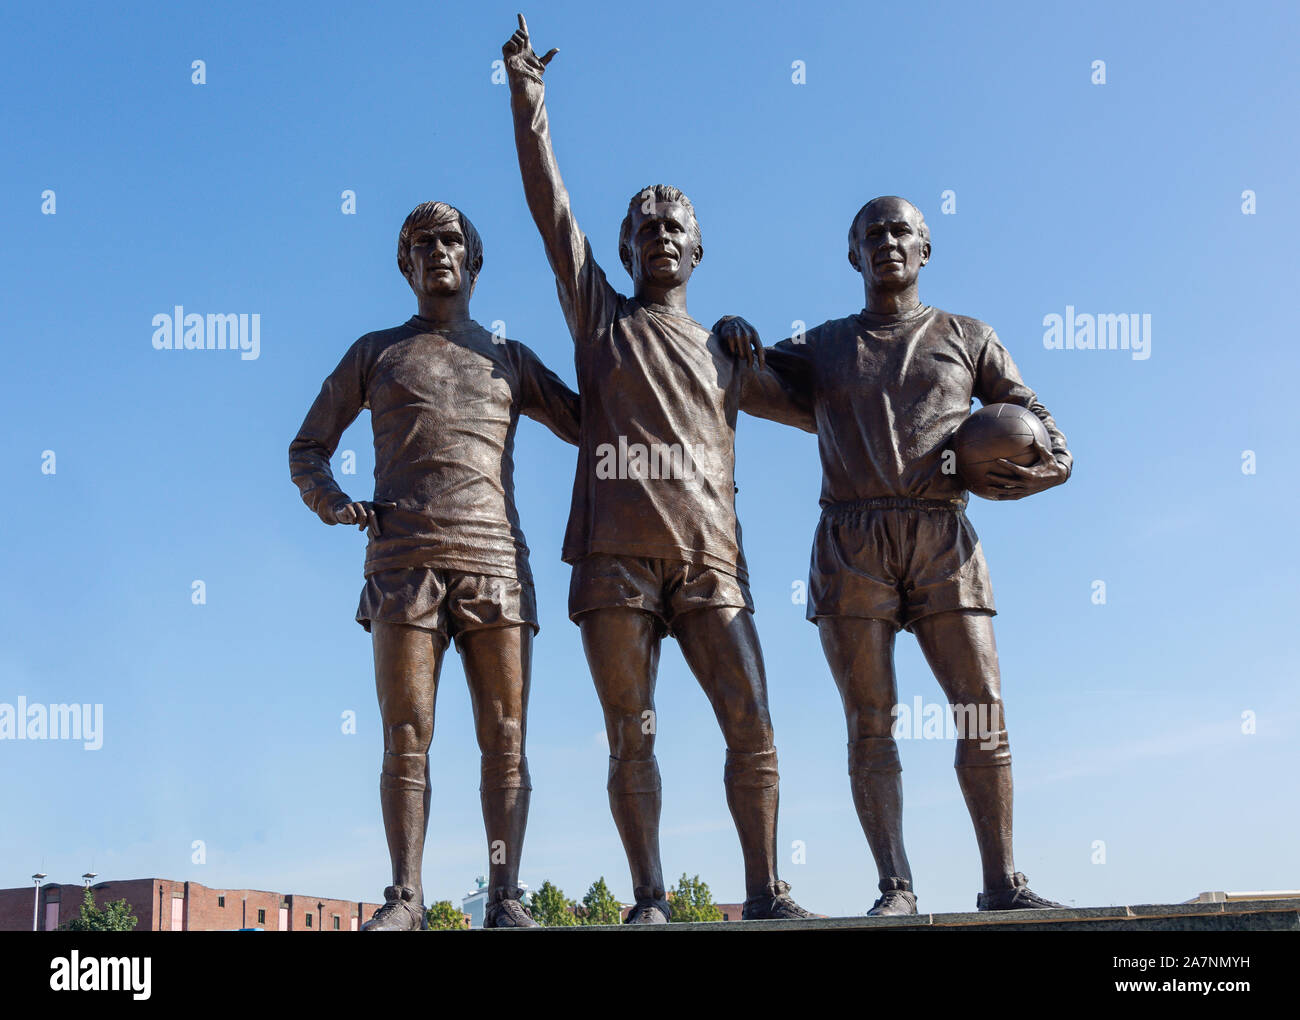 The United Trinity statue at entrance to Manchester United Old Trafford football ground, Trafford, Greater Manchester, England, United Kingdom Stock Photo